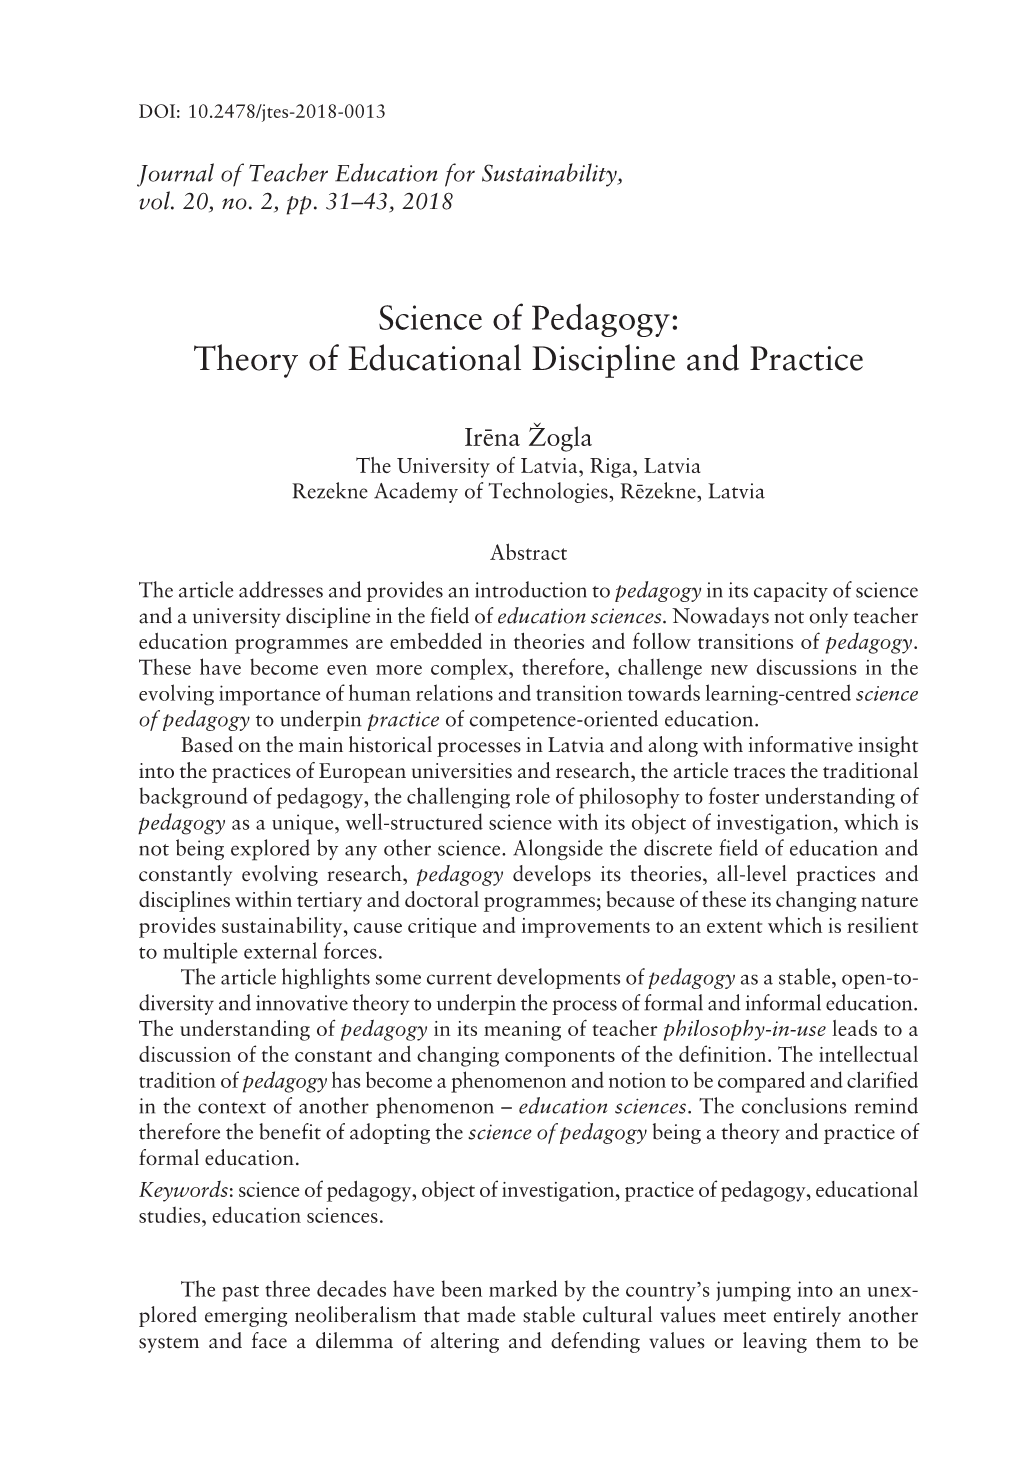 Science of Pedagogy: Theory of Educational Discipline and Practice